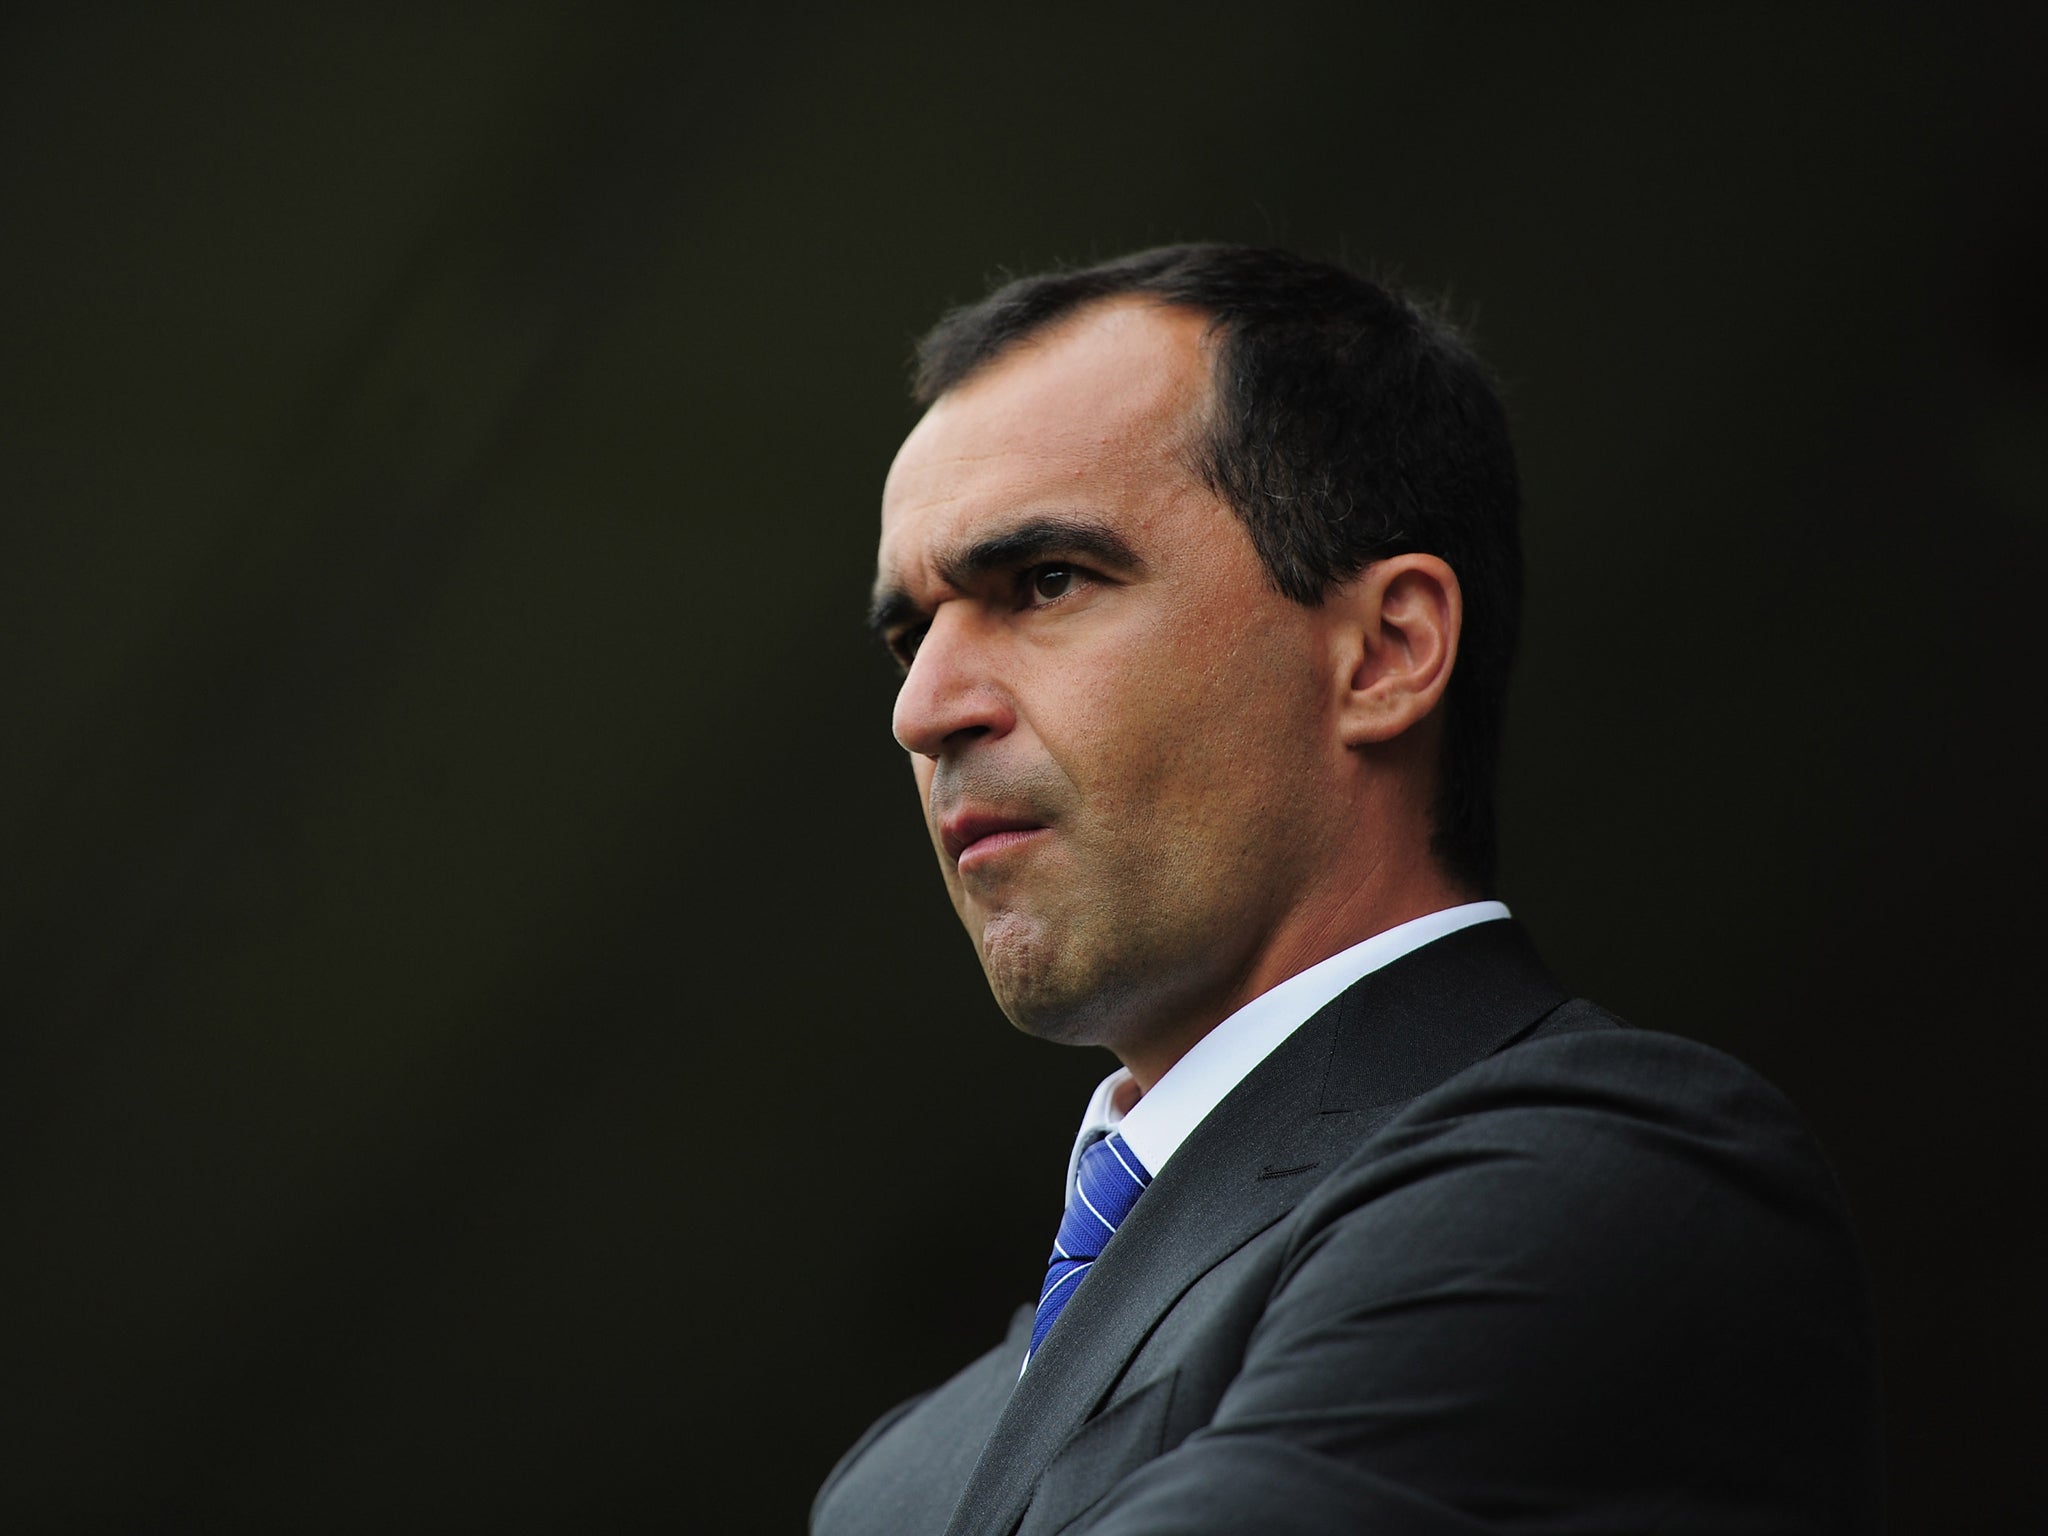 Roberto Martinez has fired off another warning to Manchester United after telling them they are wasting their time over Leighton Baines and Marouane Fellaini pursuit